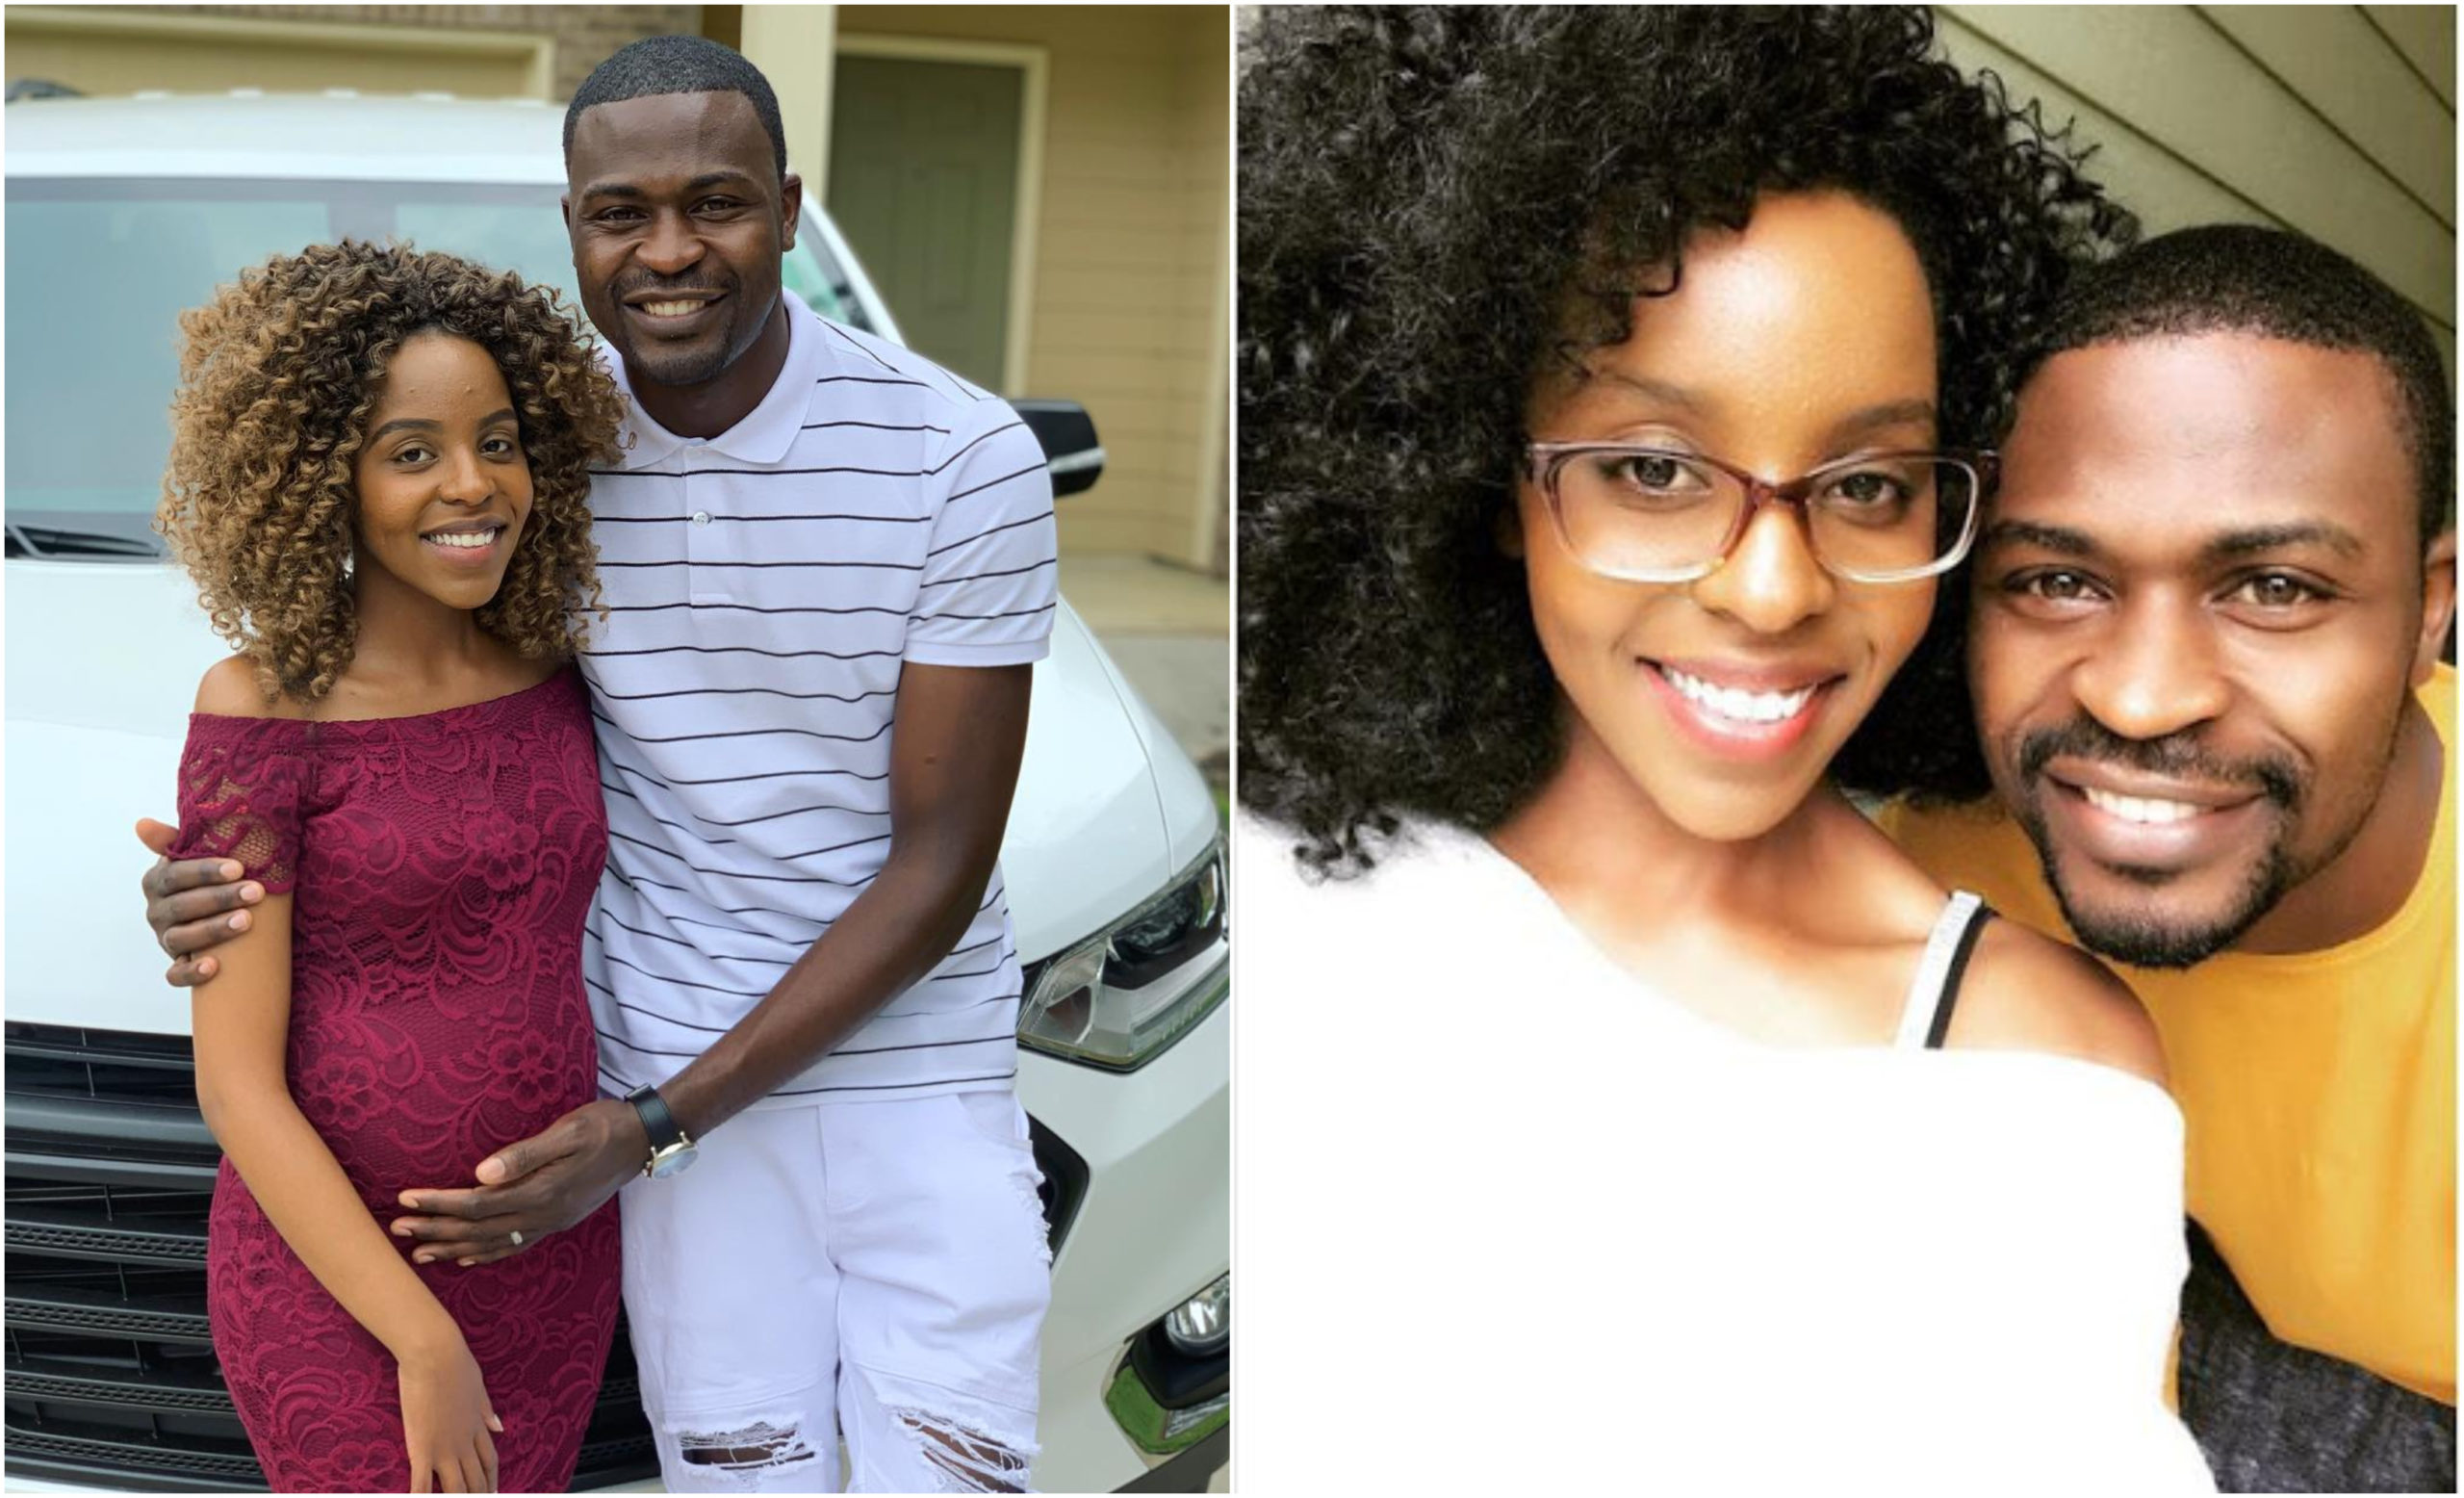 Baby on board! Singer Benachi and wife expecting baby number 2 (Video)